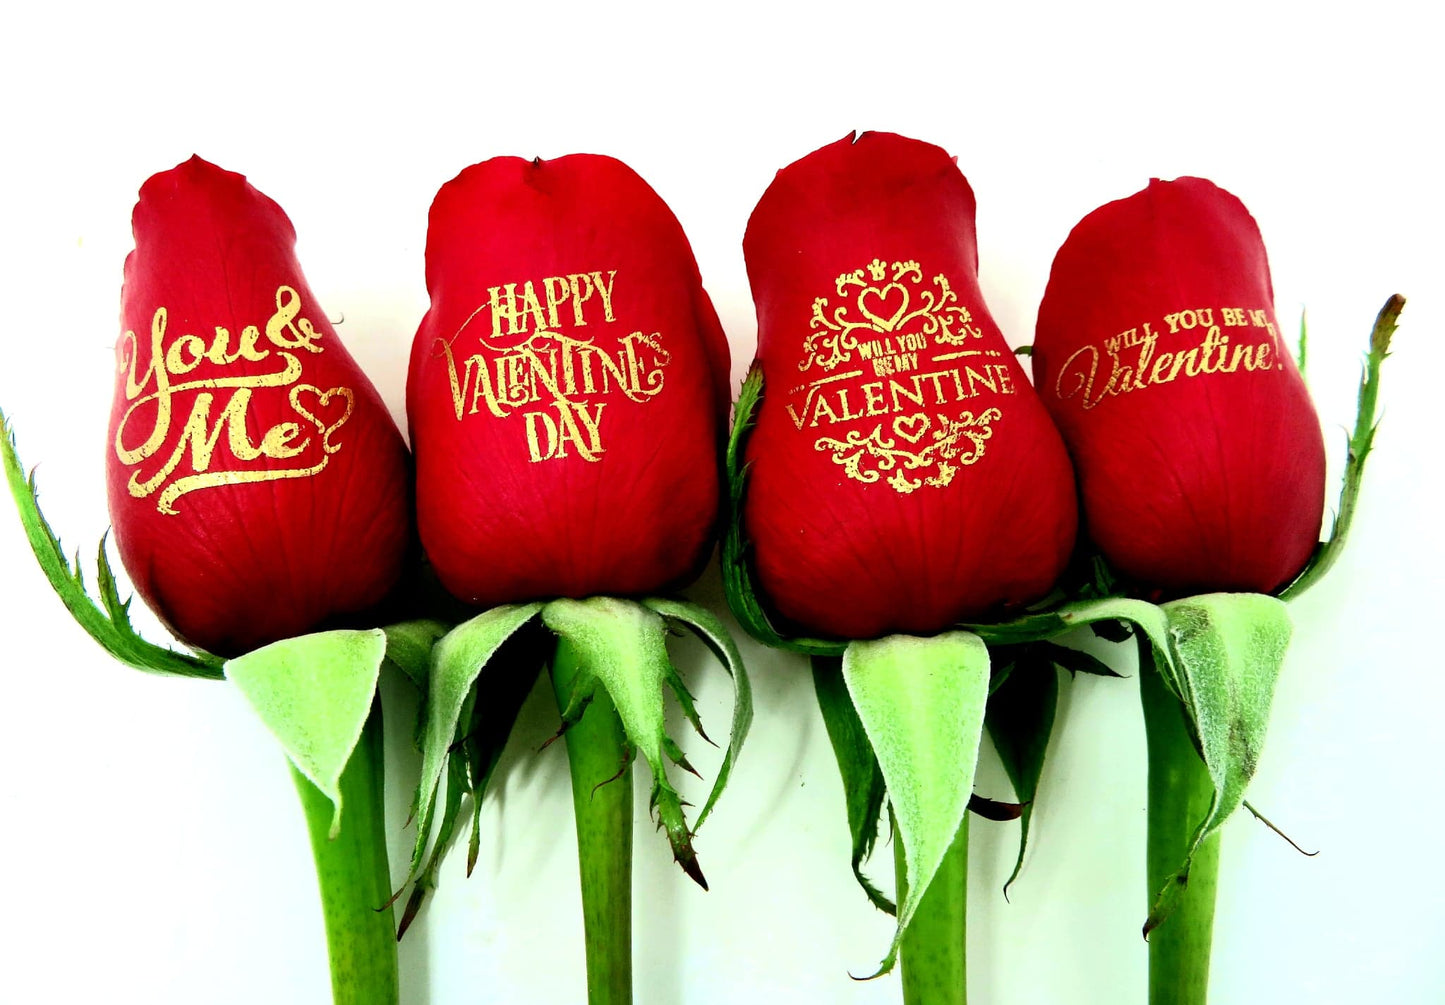 Happy Valentine's Day - 6 Red Roses with Gold Ink